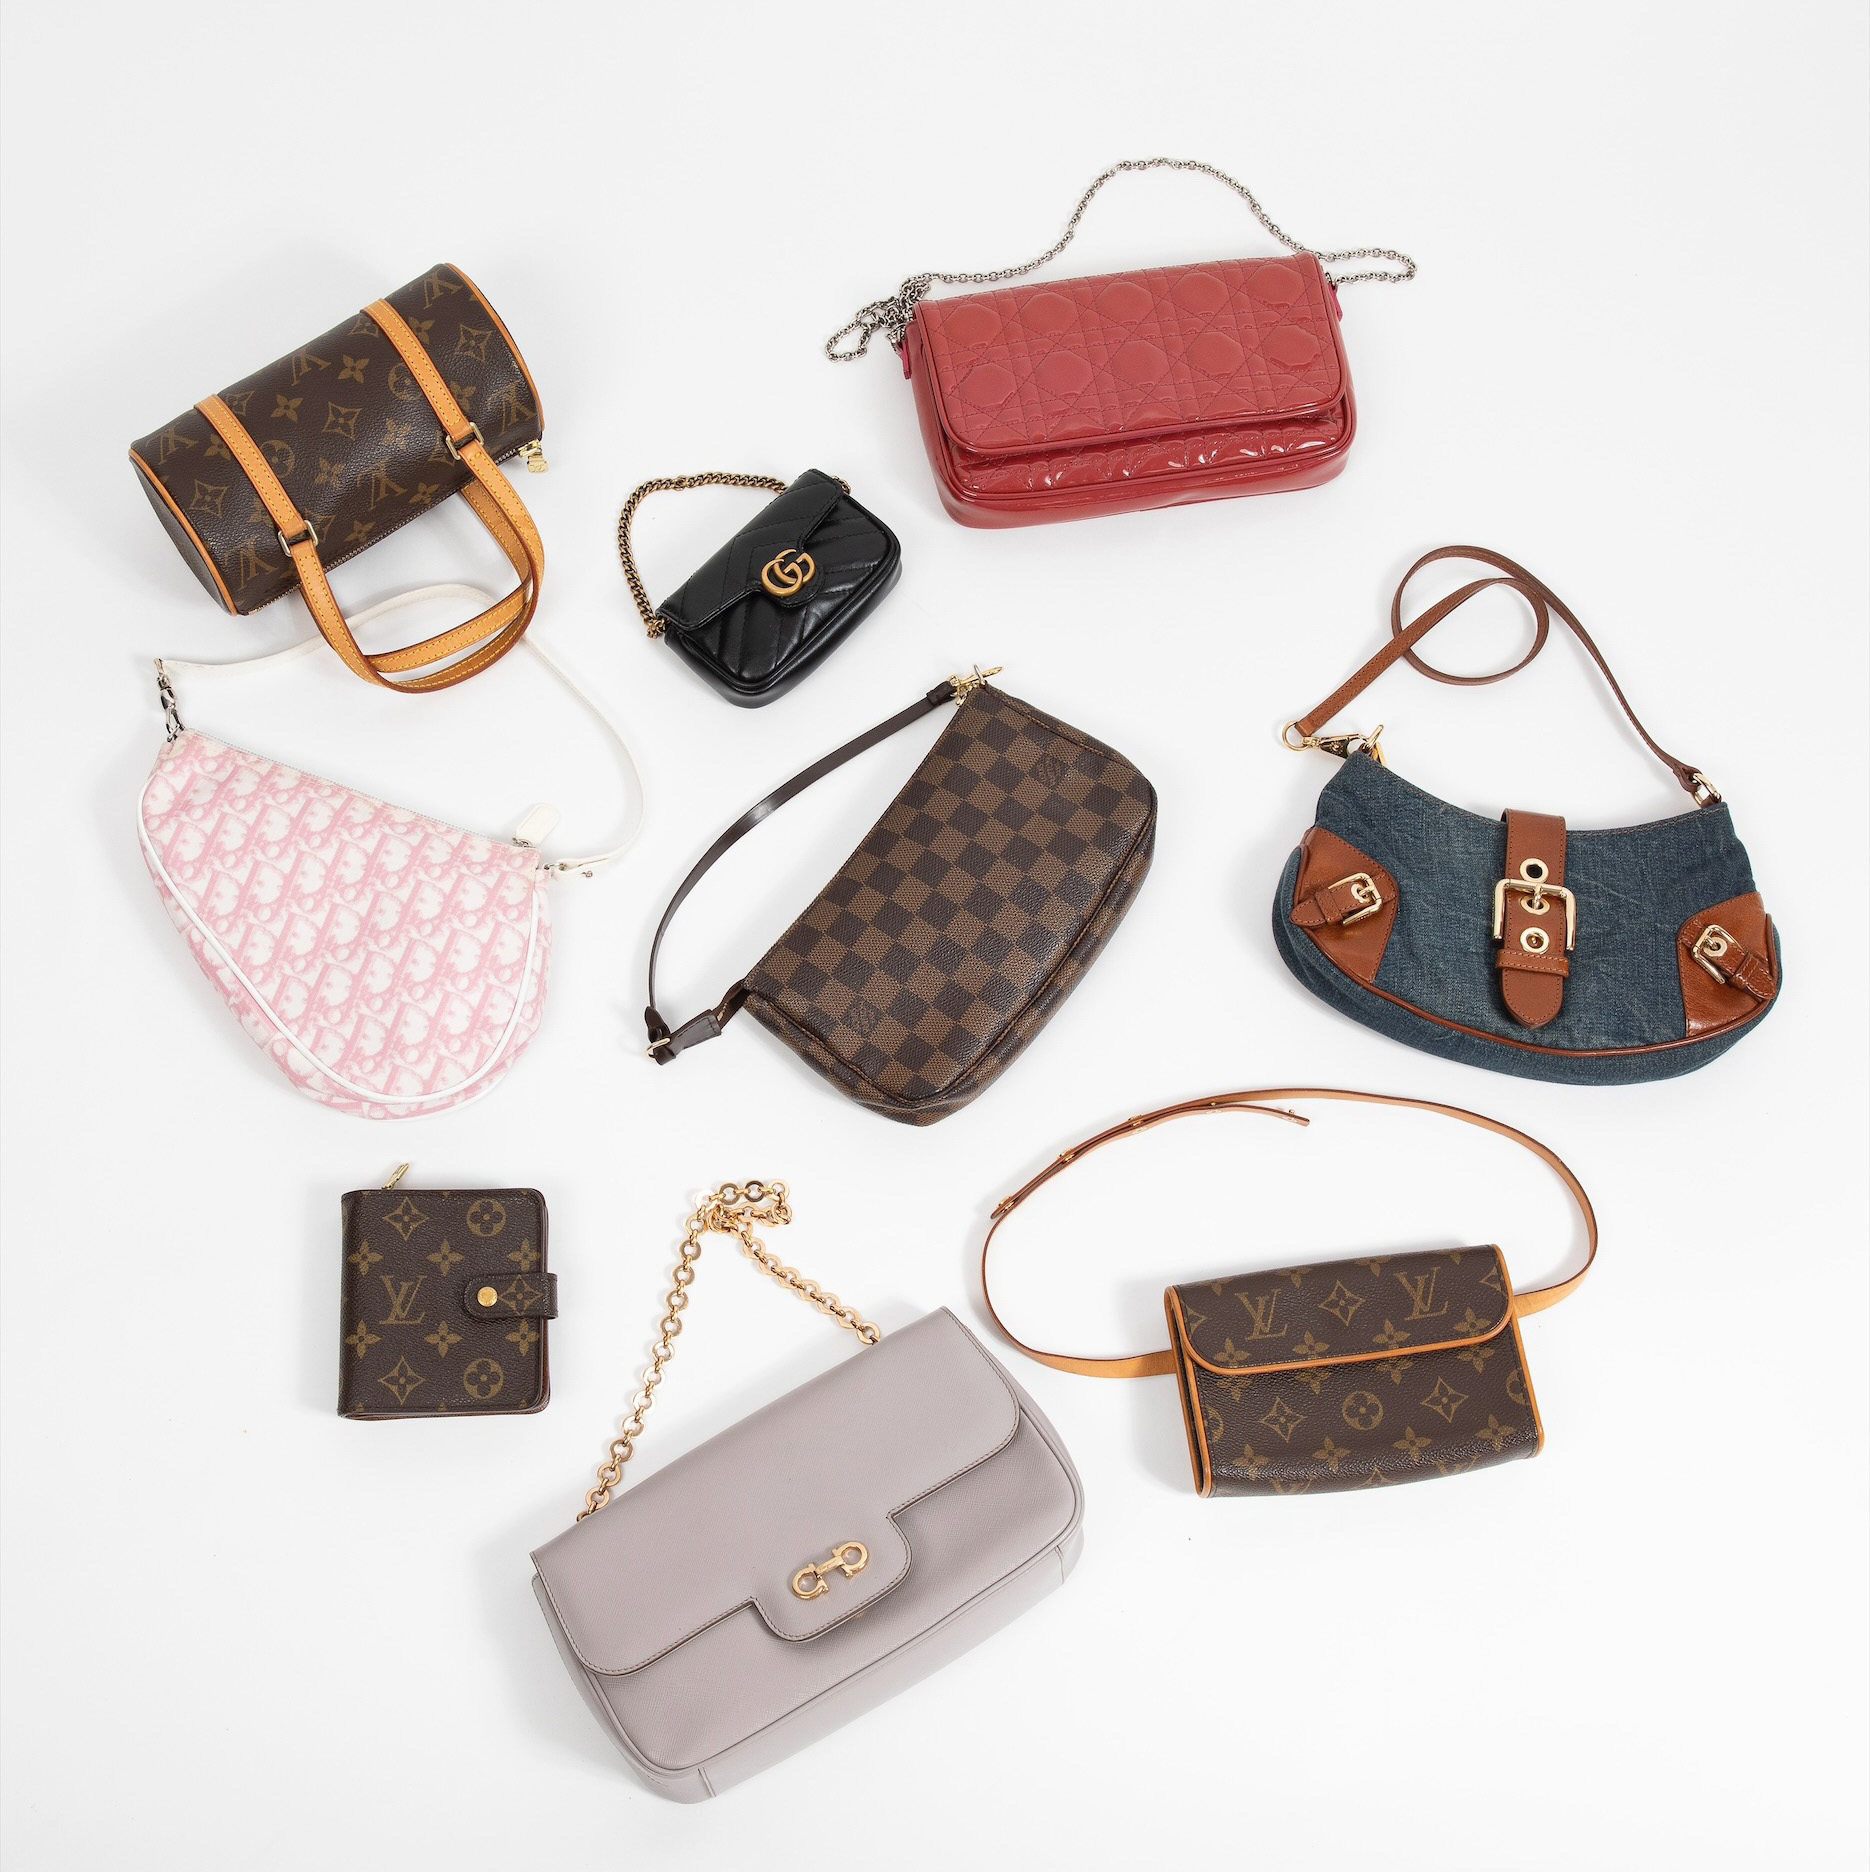 A Guide to Louis Vuitton Date Codes - Vilma's Vault